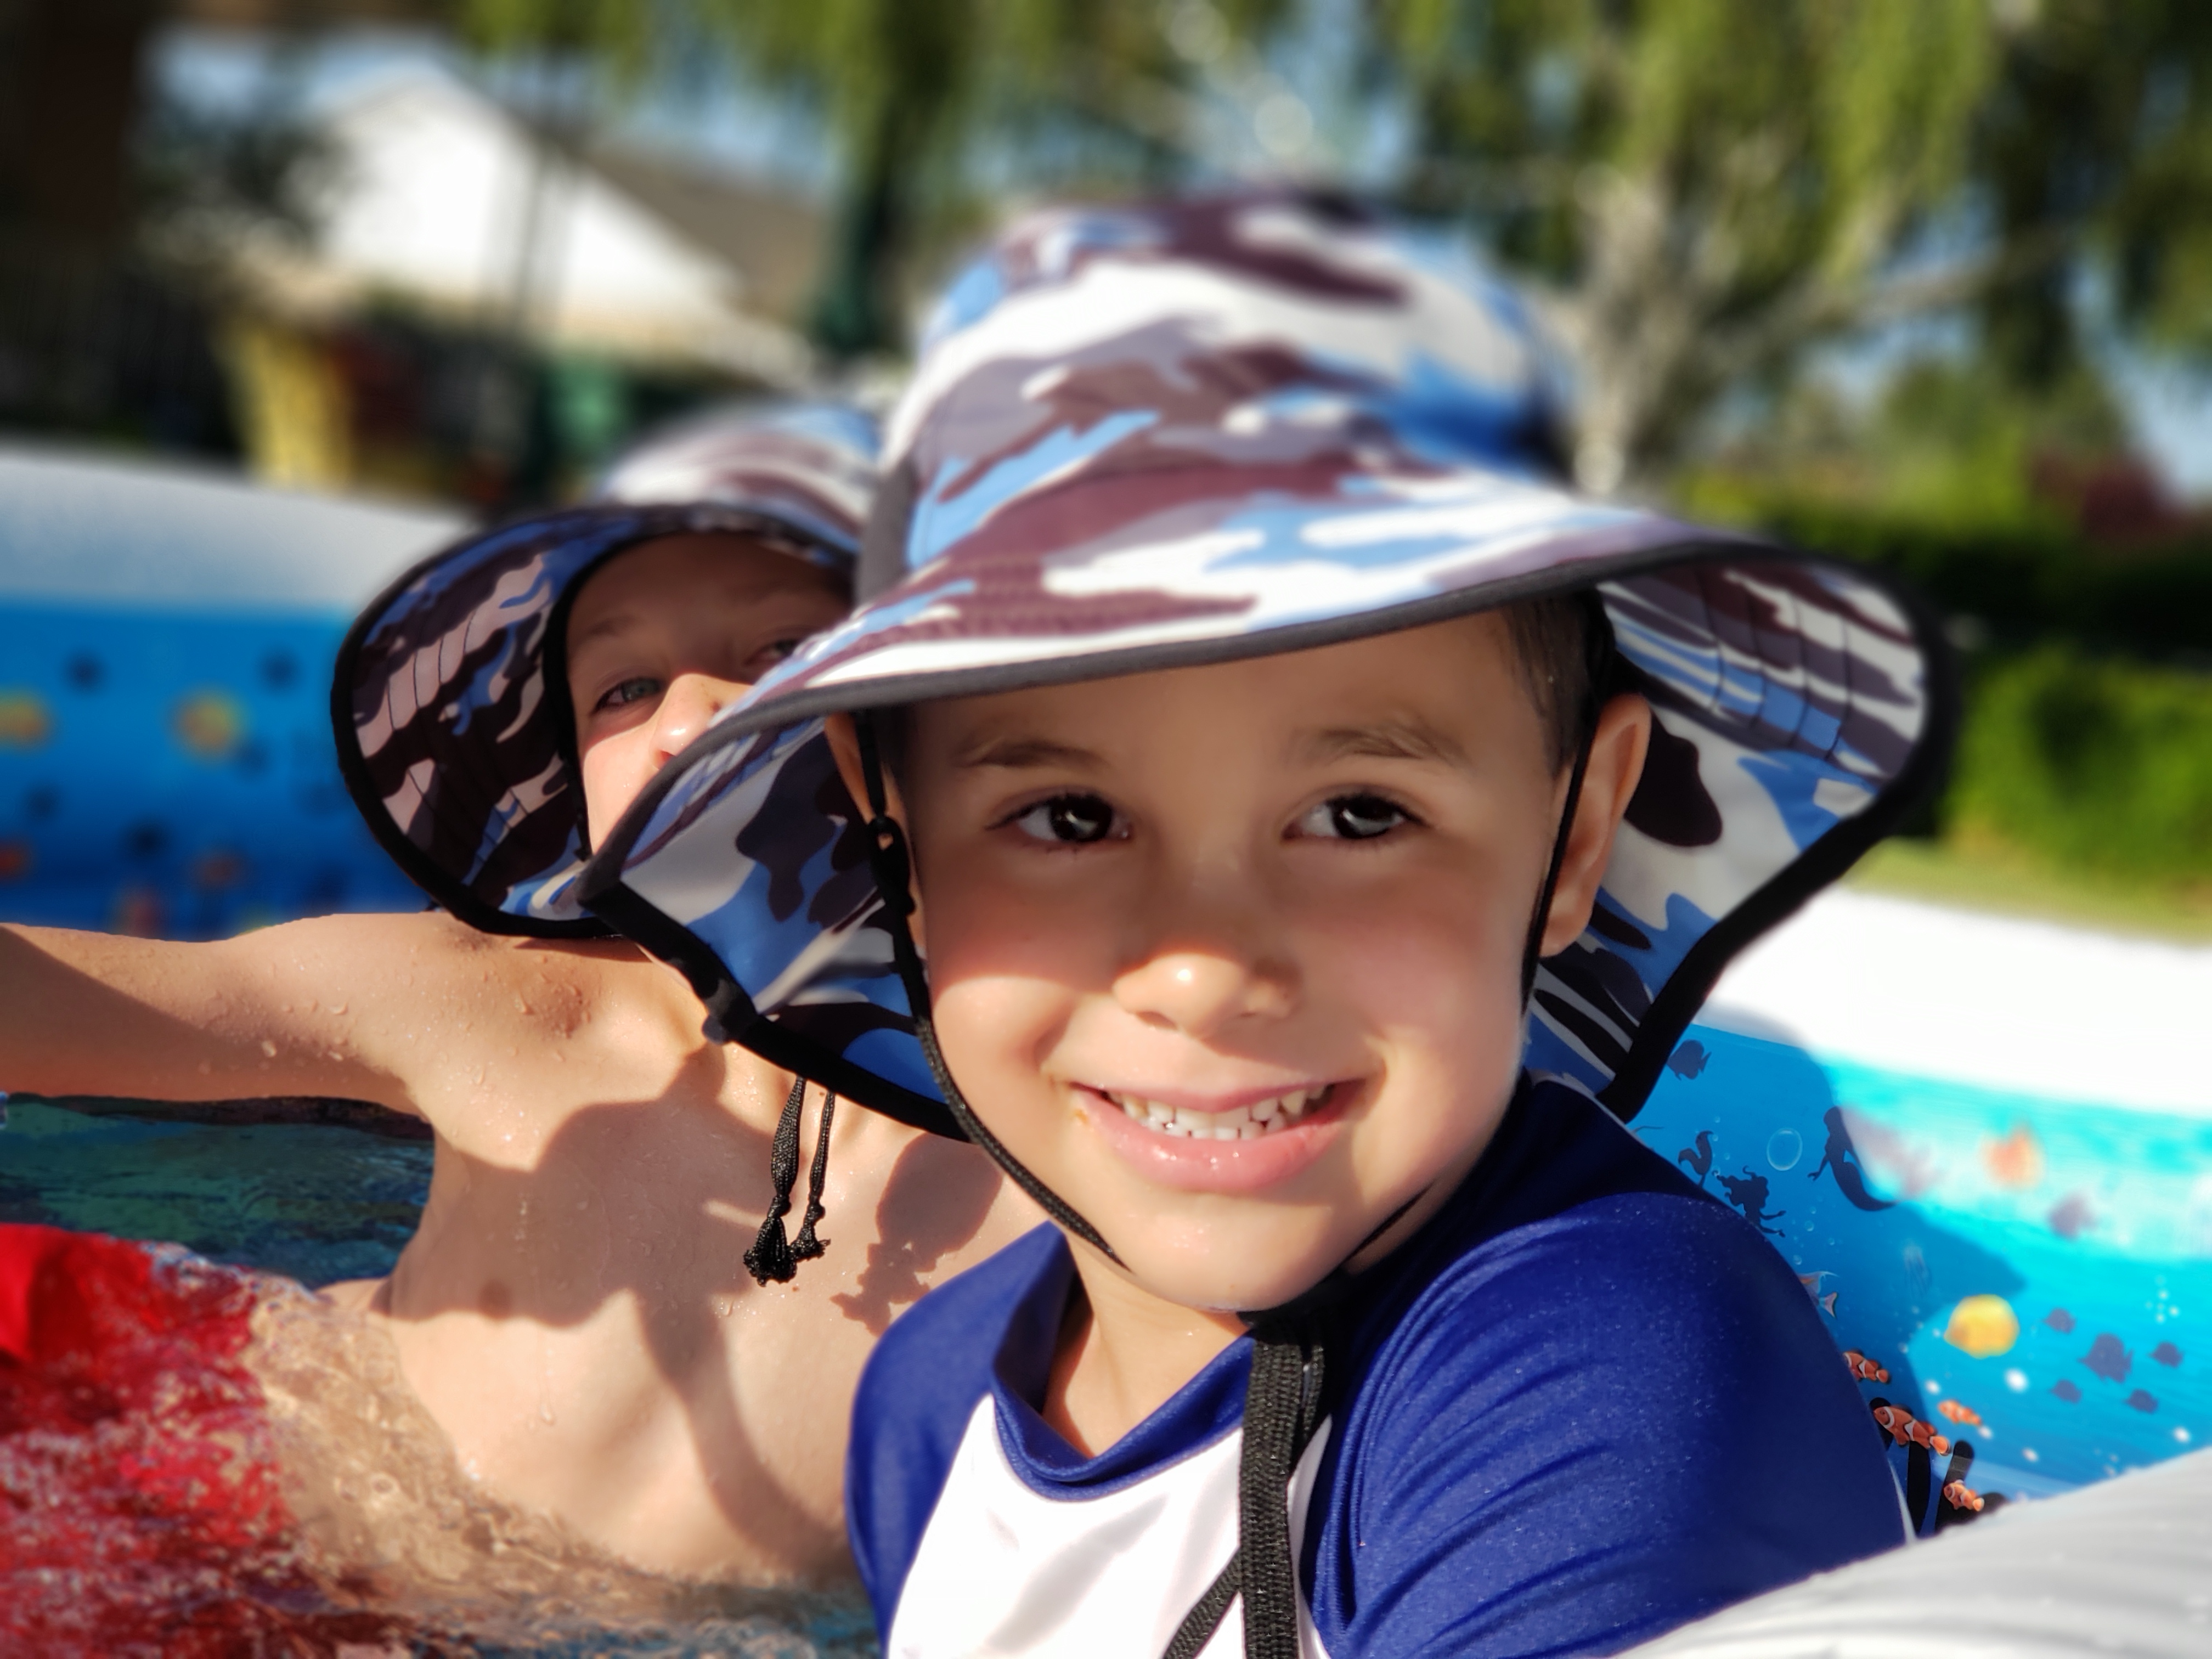 Kid's Hats to Help Keep Cool This Summer